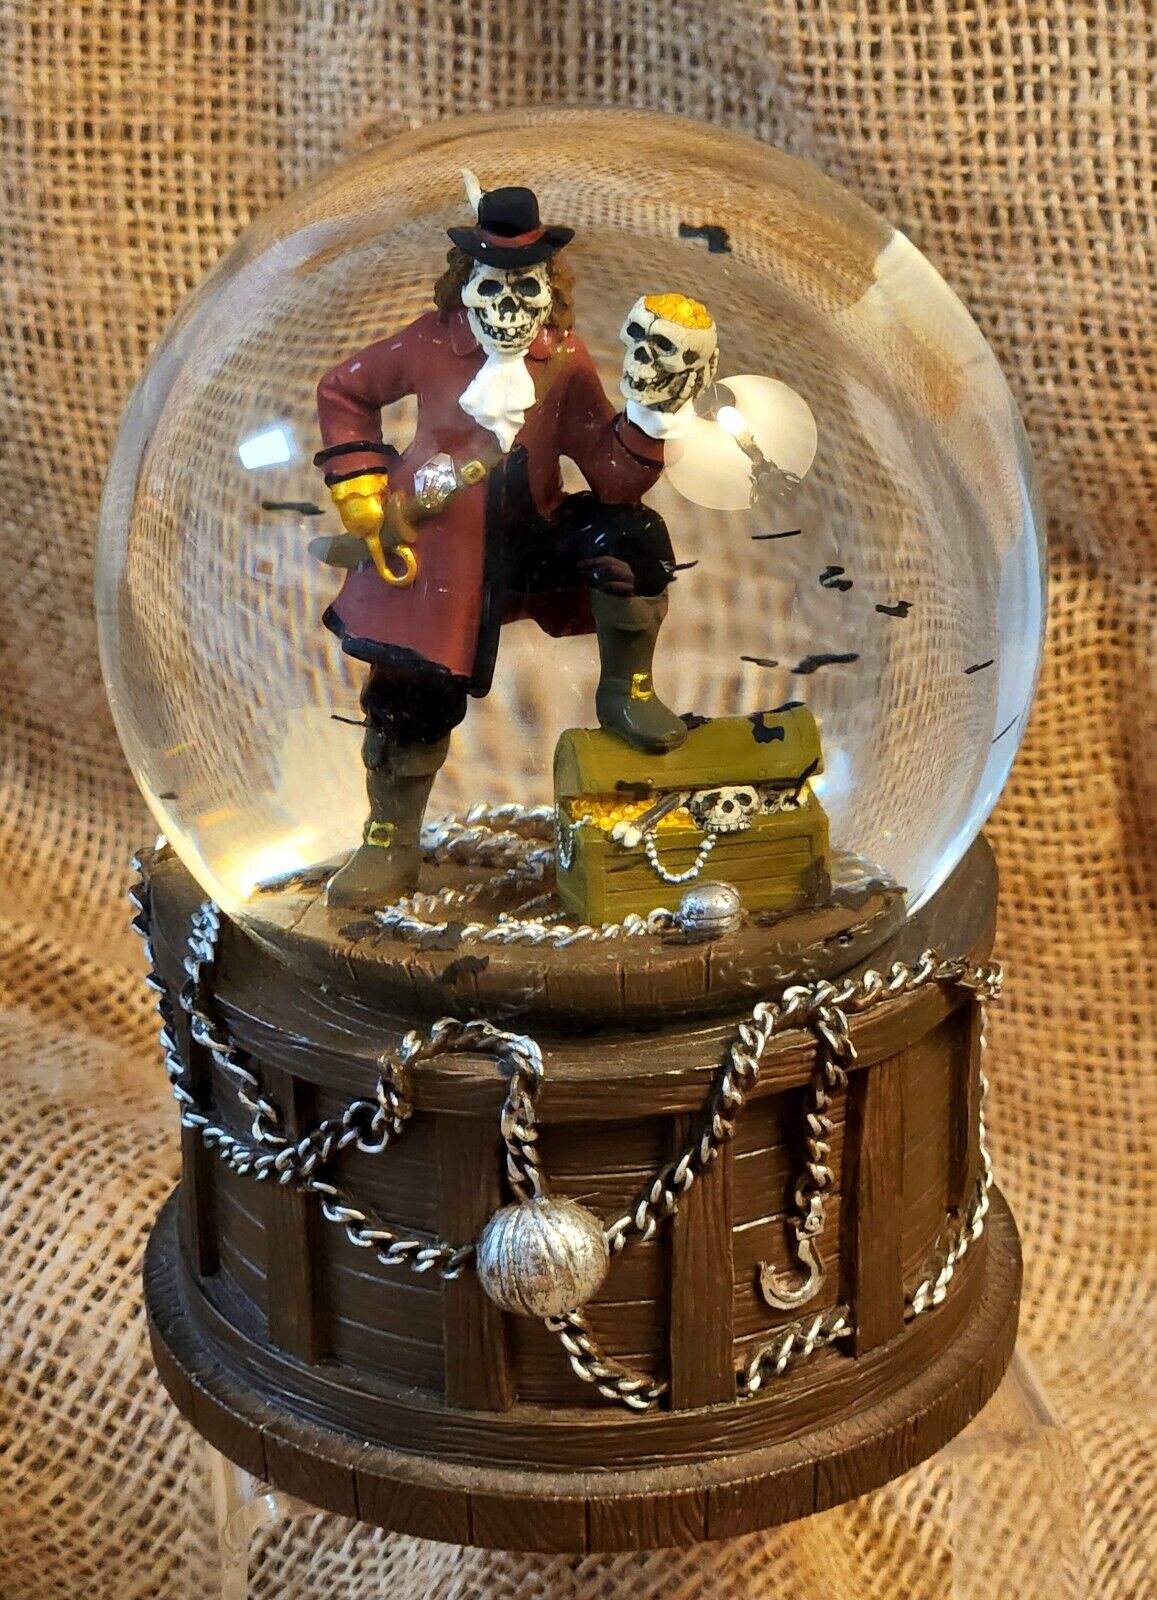 Pirate Halloween Snow Globe with Bats, Plays Music, Excellent Condition